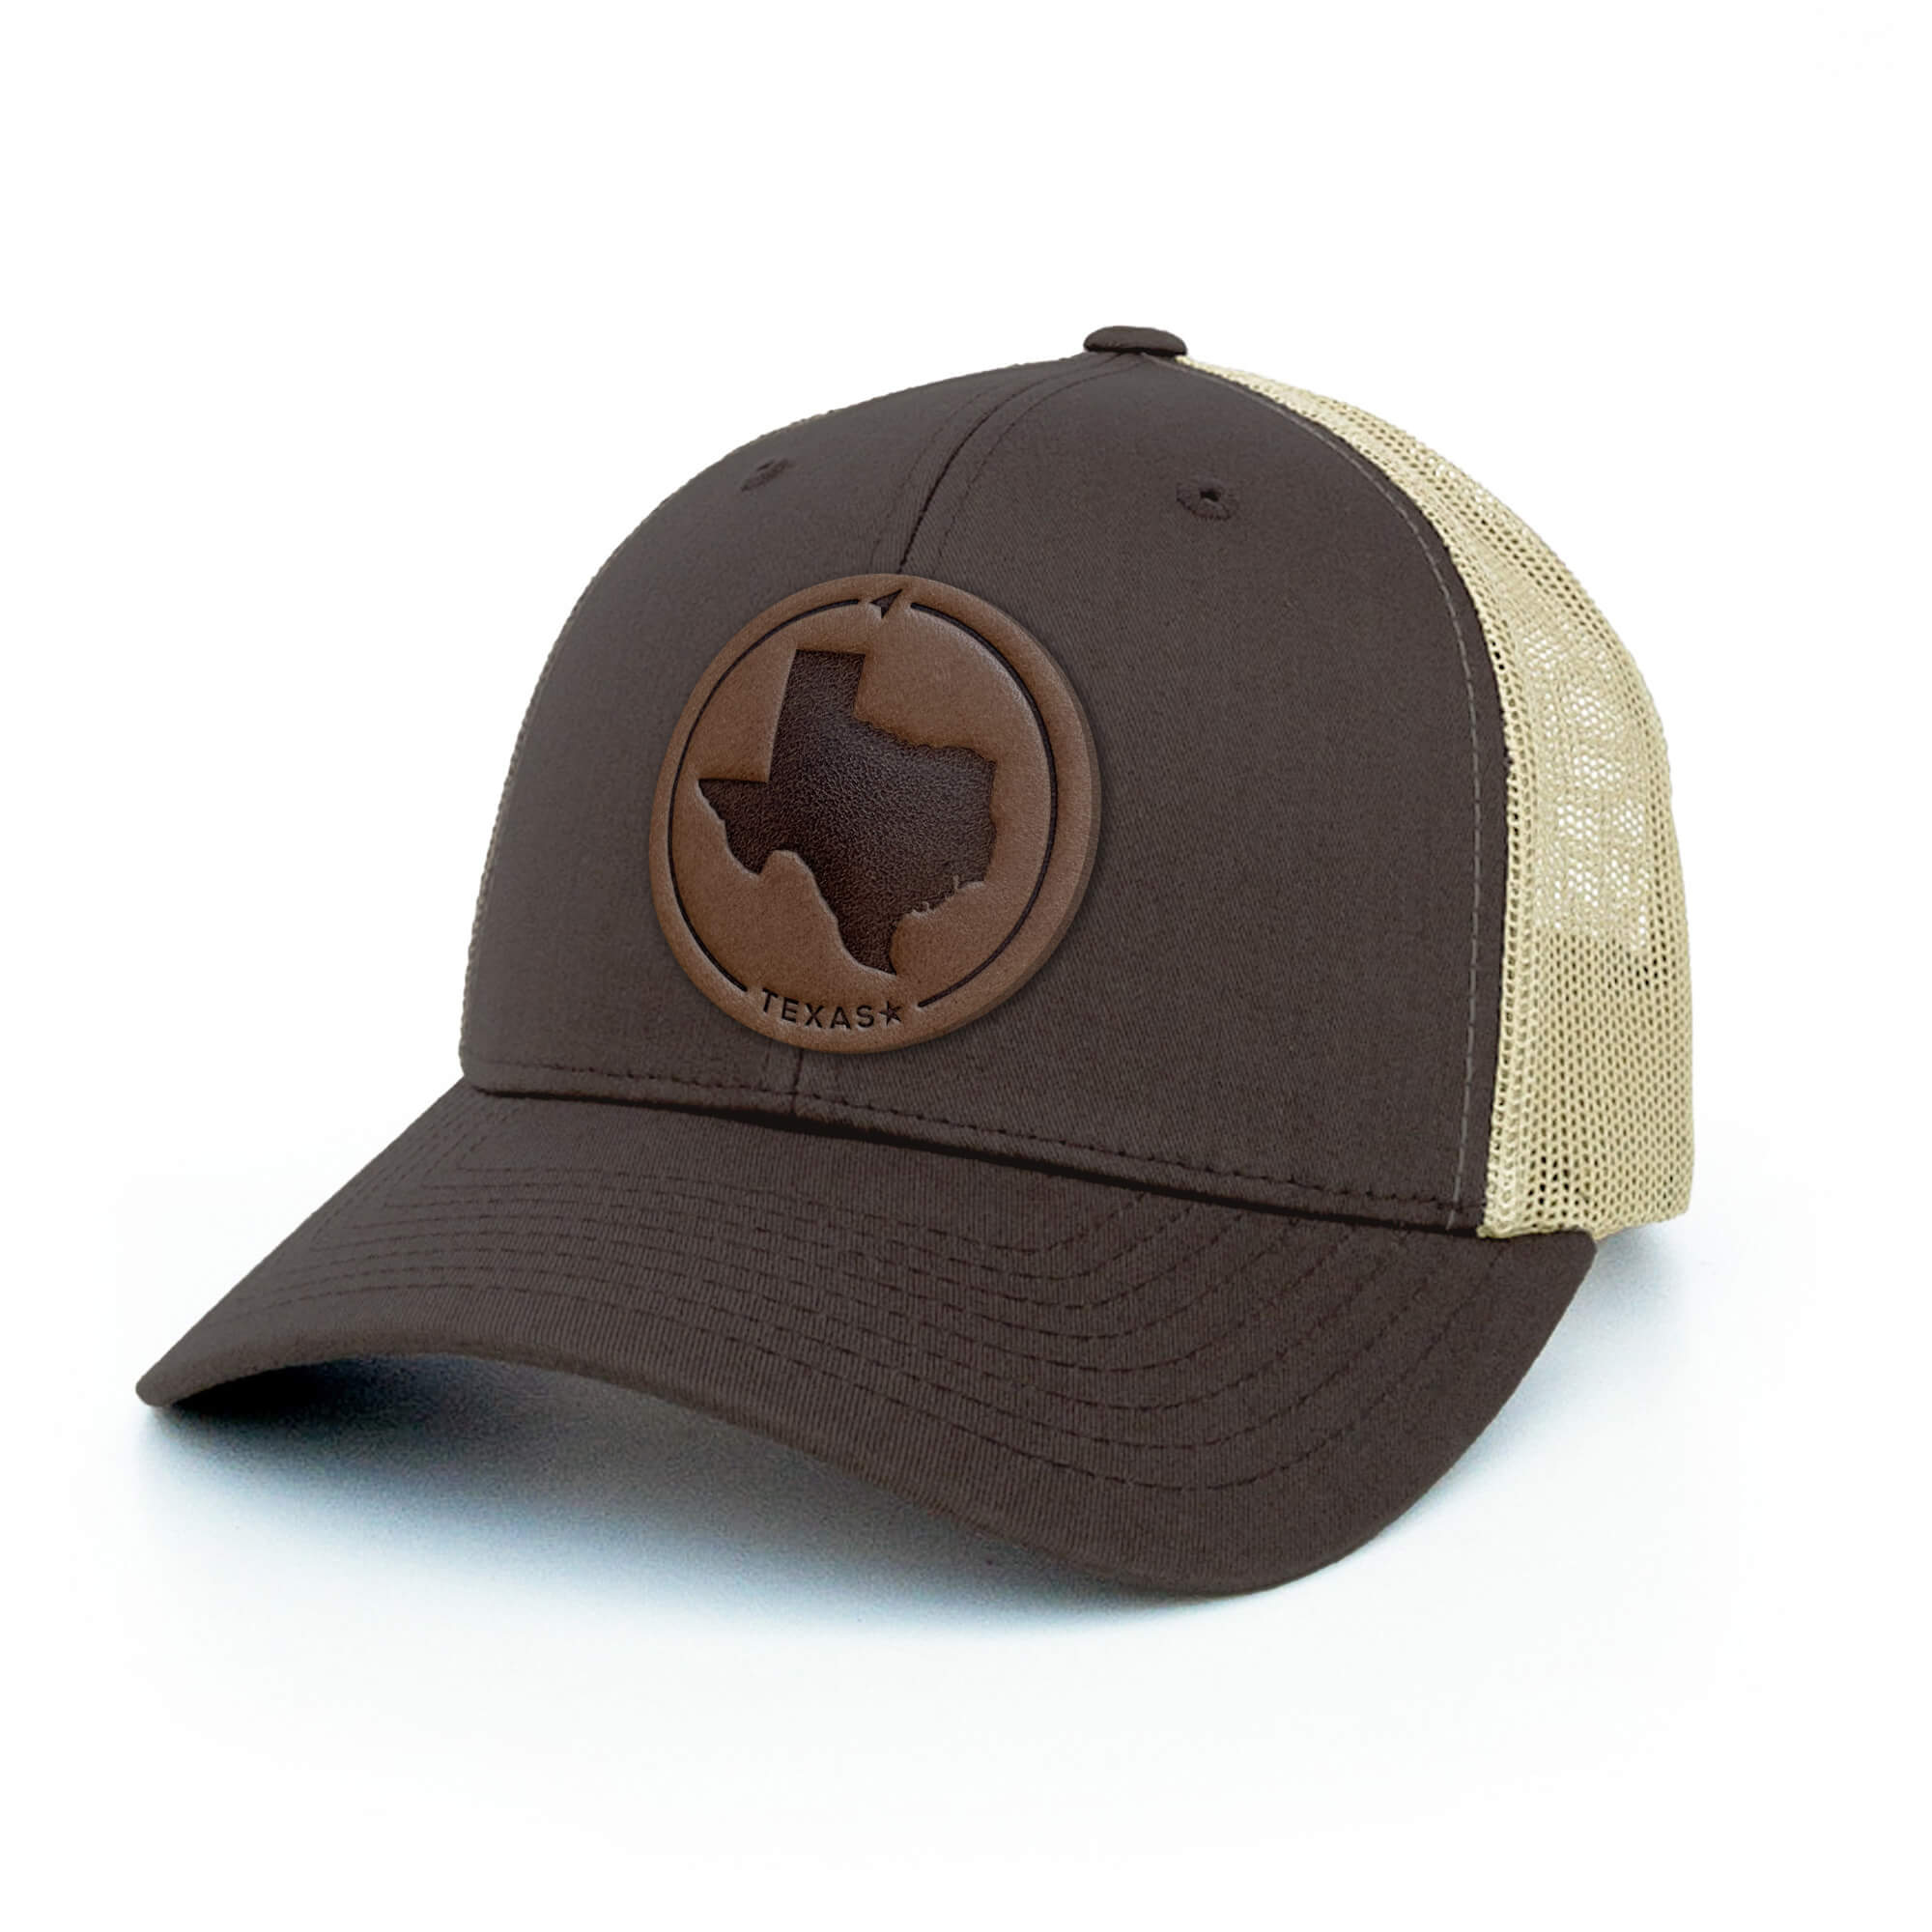 Brown and khaki trucker hat with full-grain leather patch of Texas | BLACK-003-002, CHARC-003-002, NAVY-003-002, HGREY-003-002, MOSS-003-002, BROWN-003-002